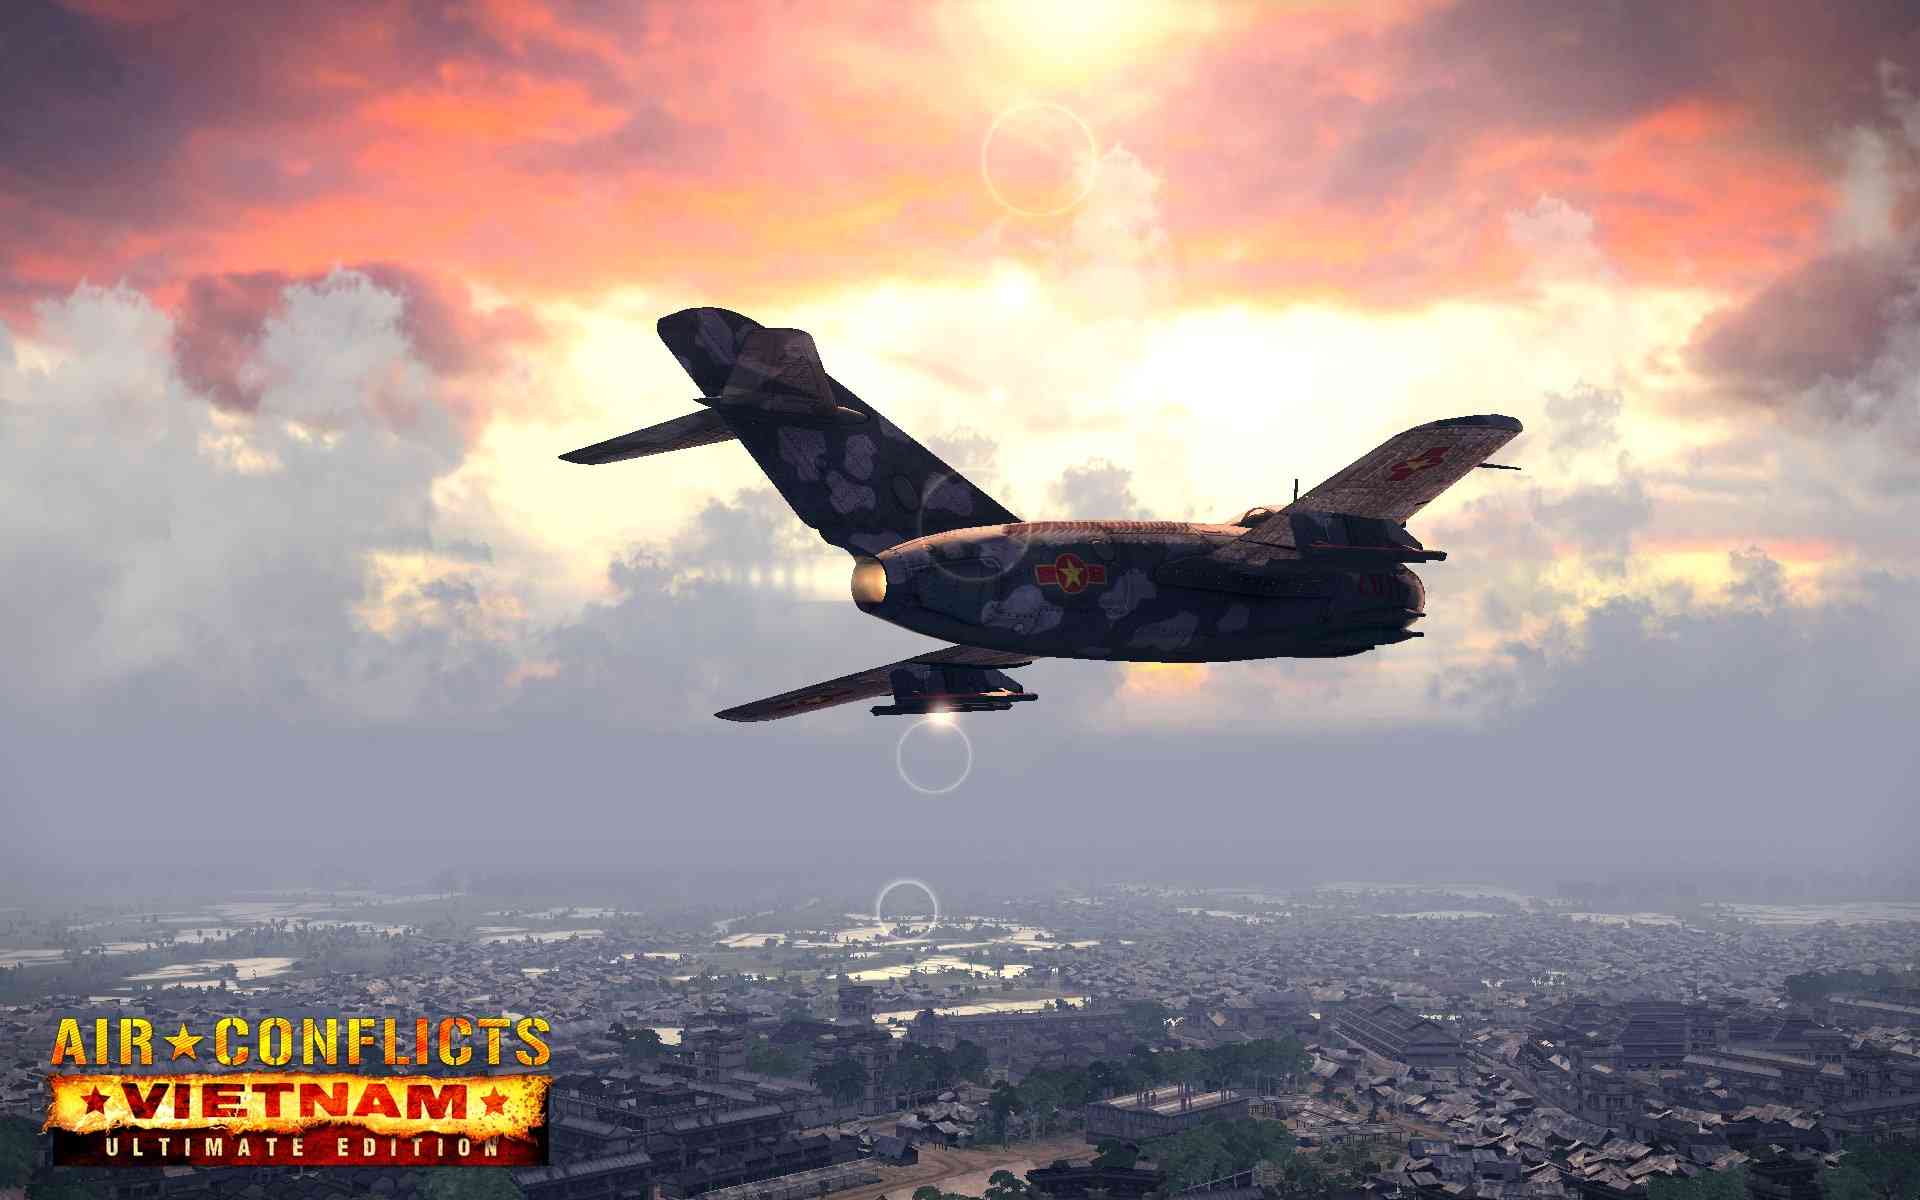 air-conflicts-vietnam-ultimate-edition-to-be-released-summer-2014-as-ps4-exclusive-cogconnected